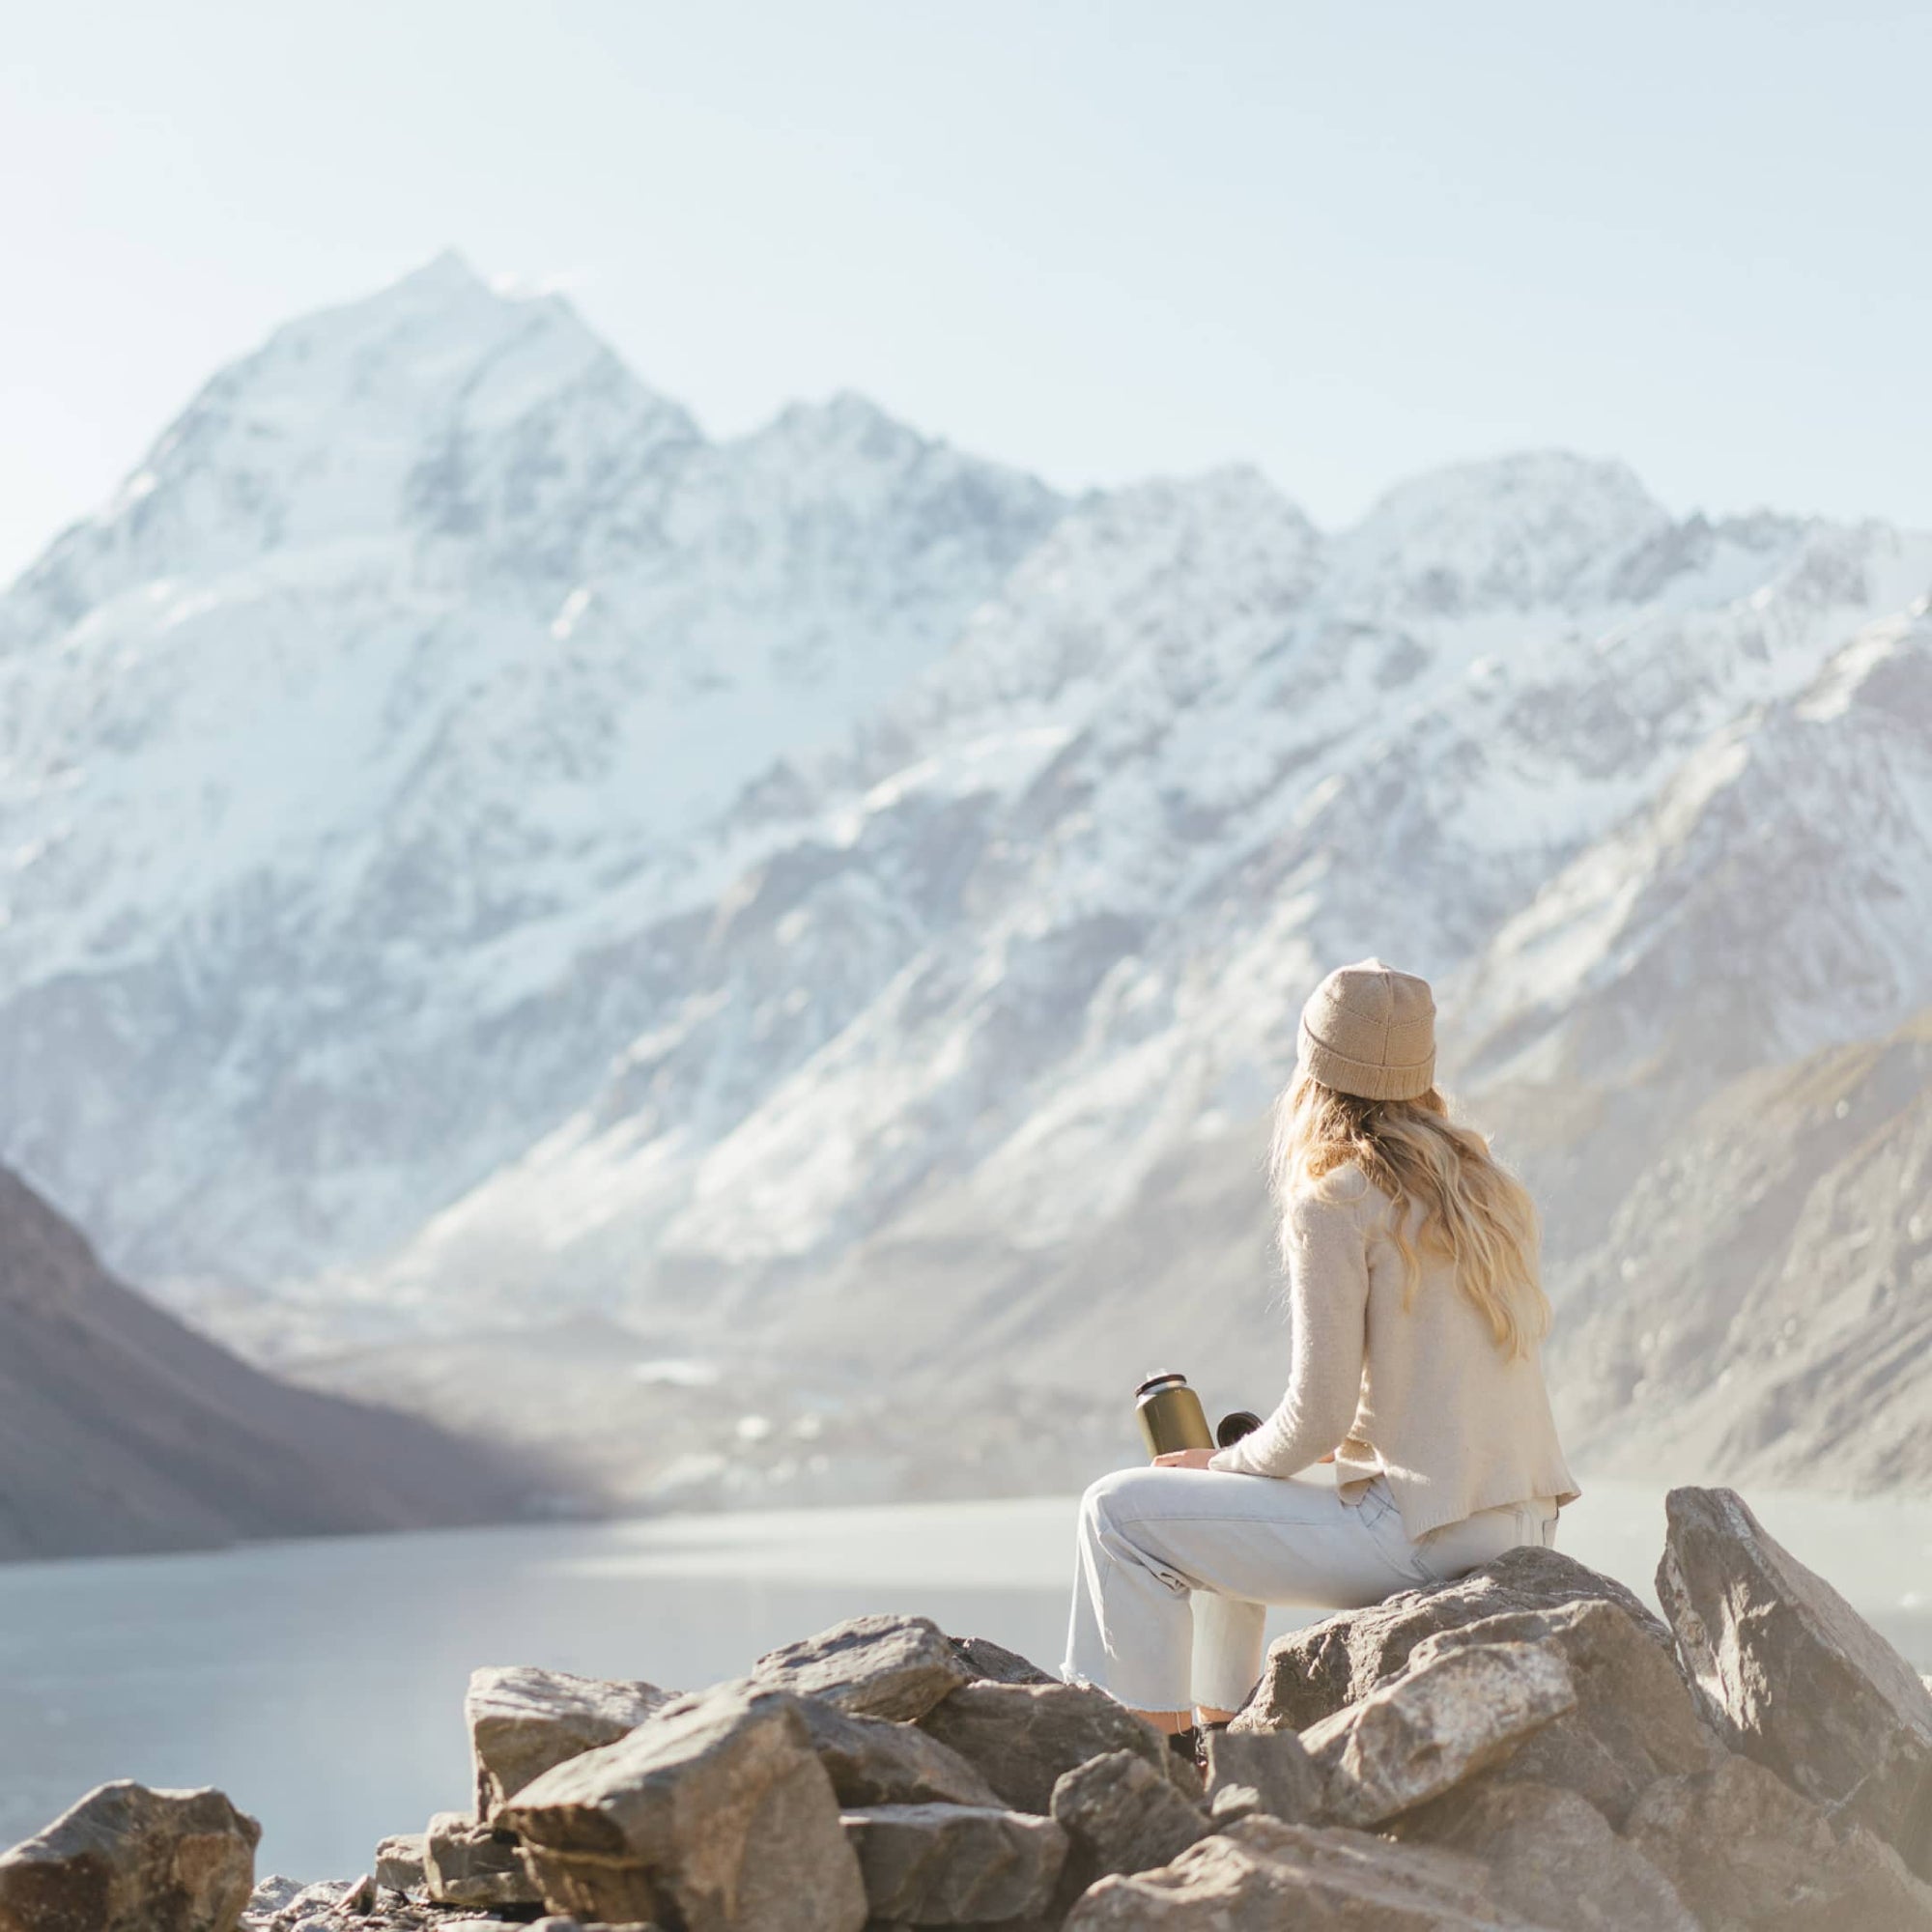 A woman sits on a rock looking at the mountain views